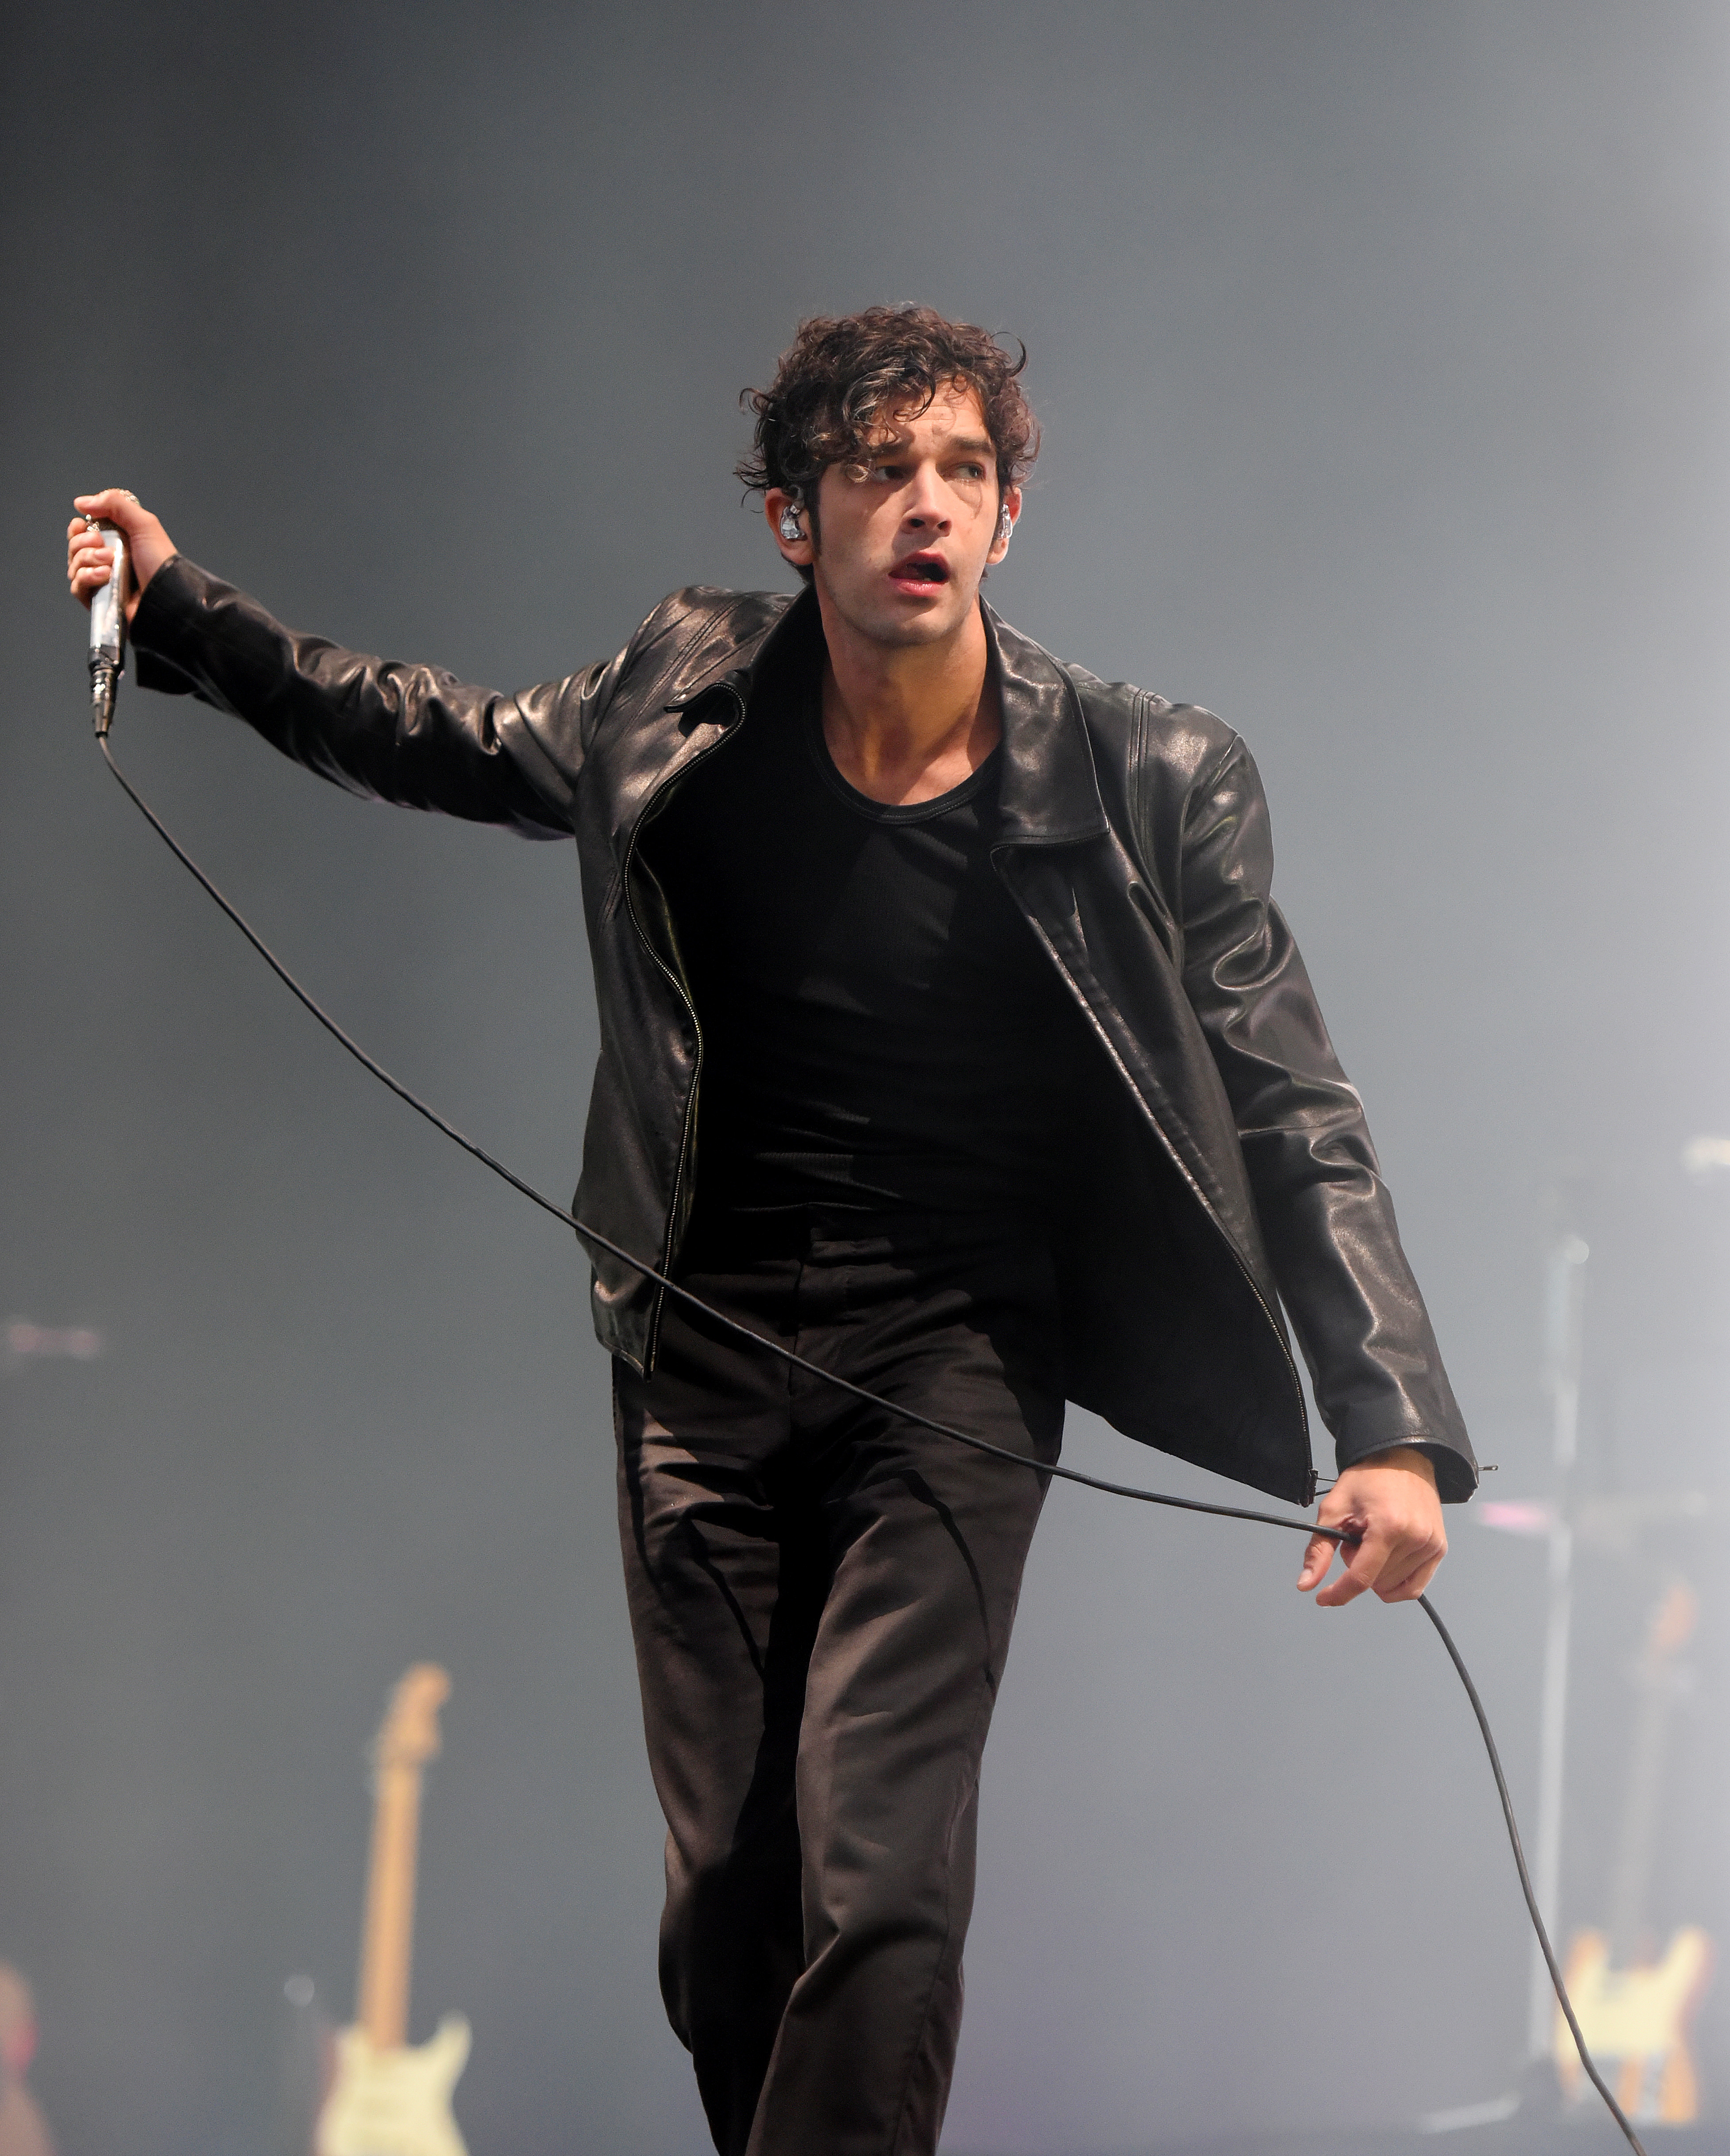 Matt Healy in a leather jacket  performing on stage